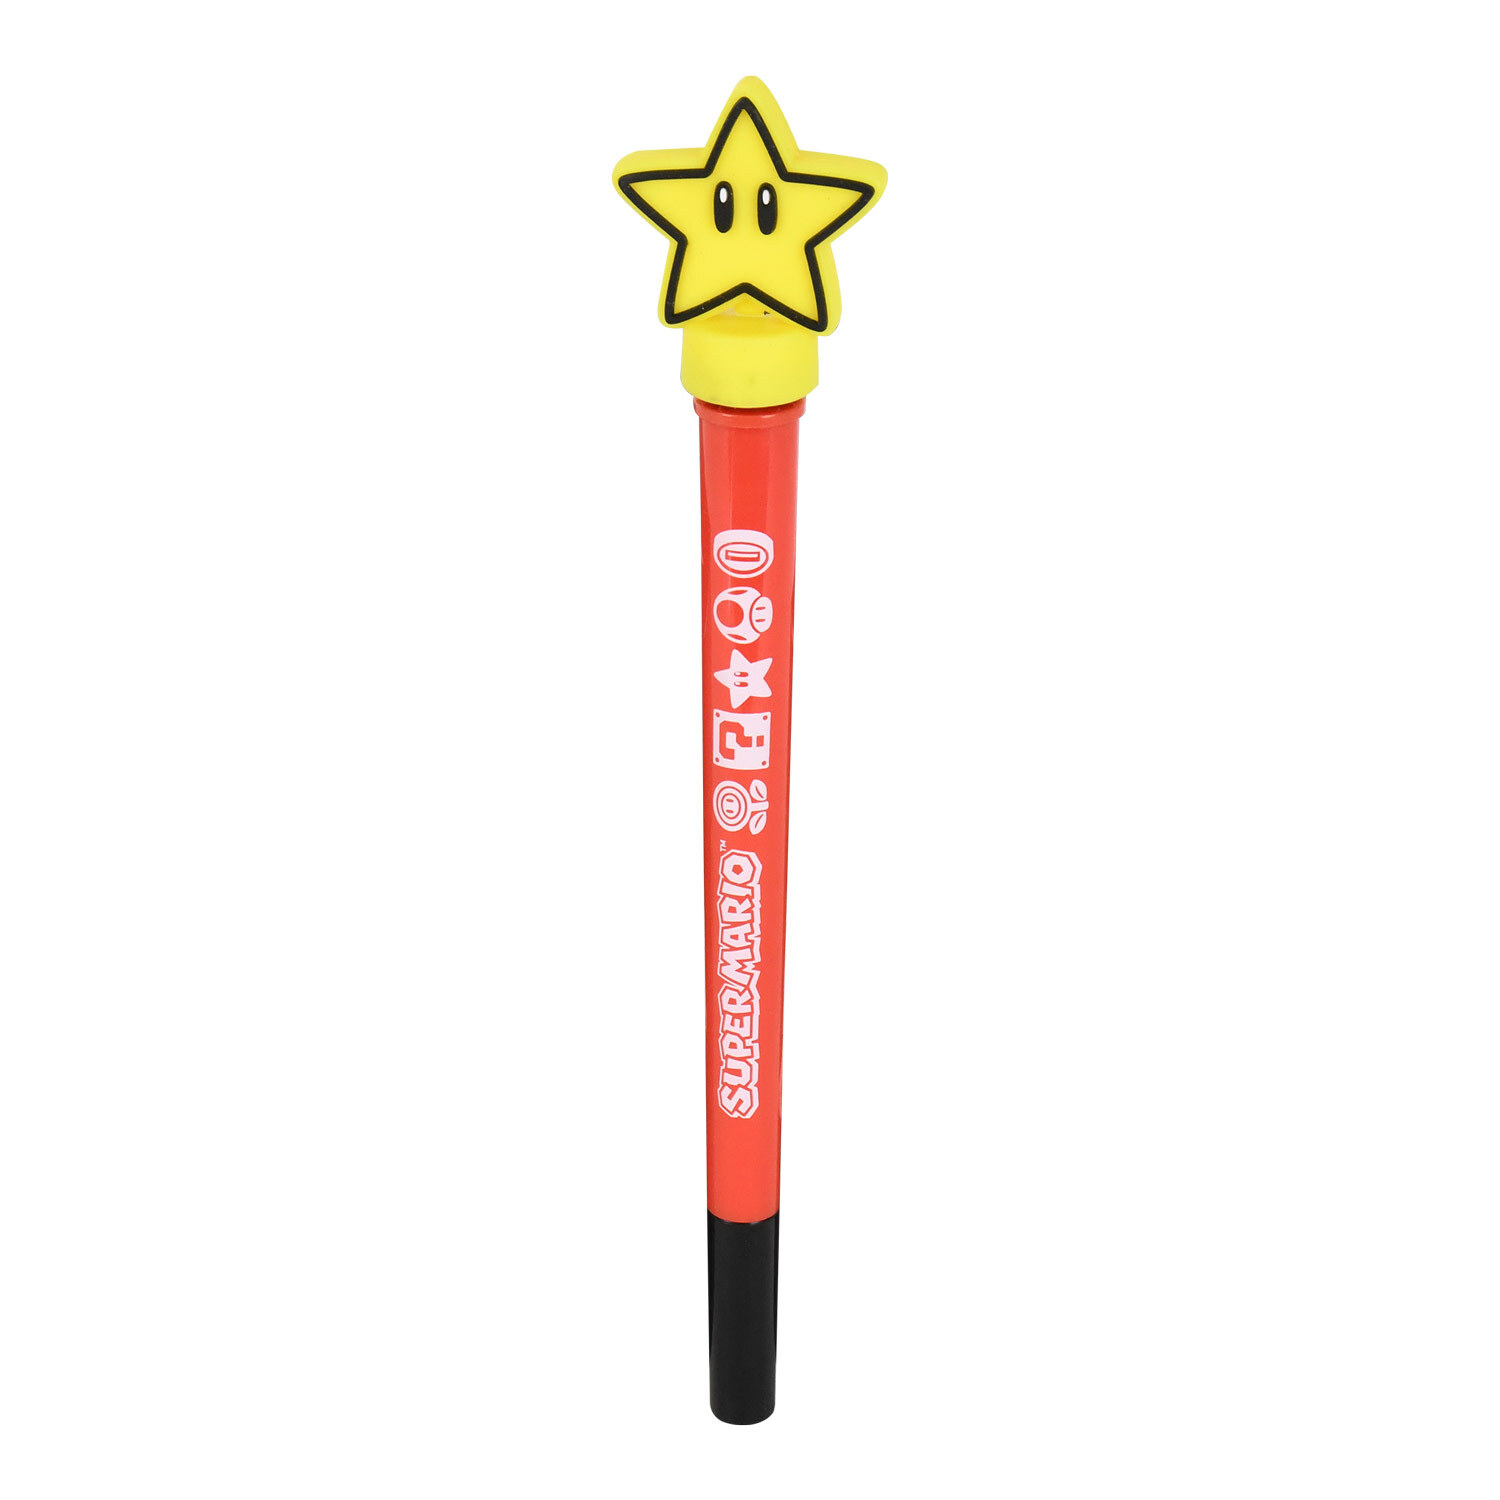 Super Mario Spinning Topper Pen - Yellow Image